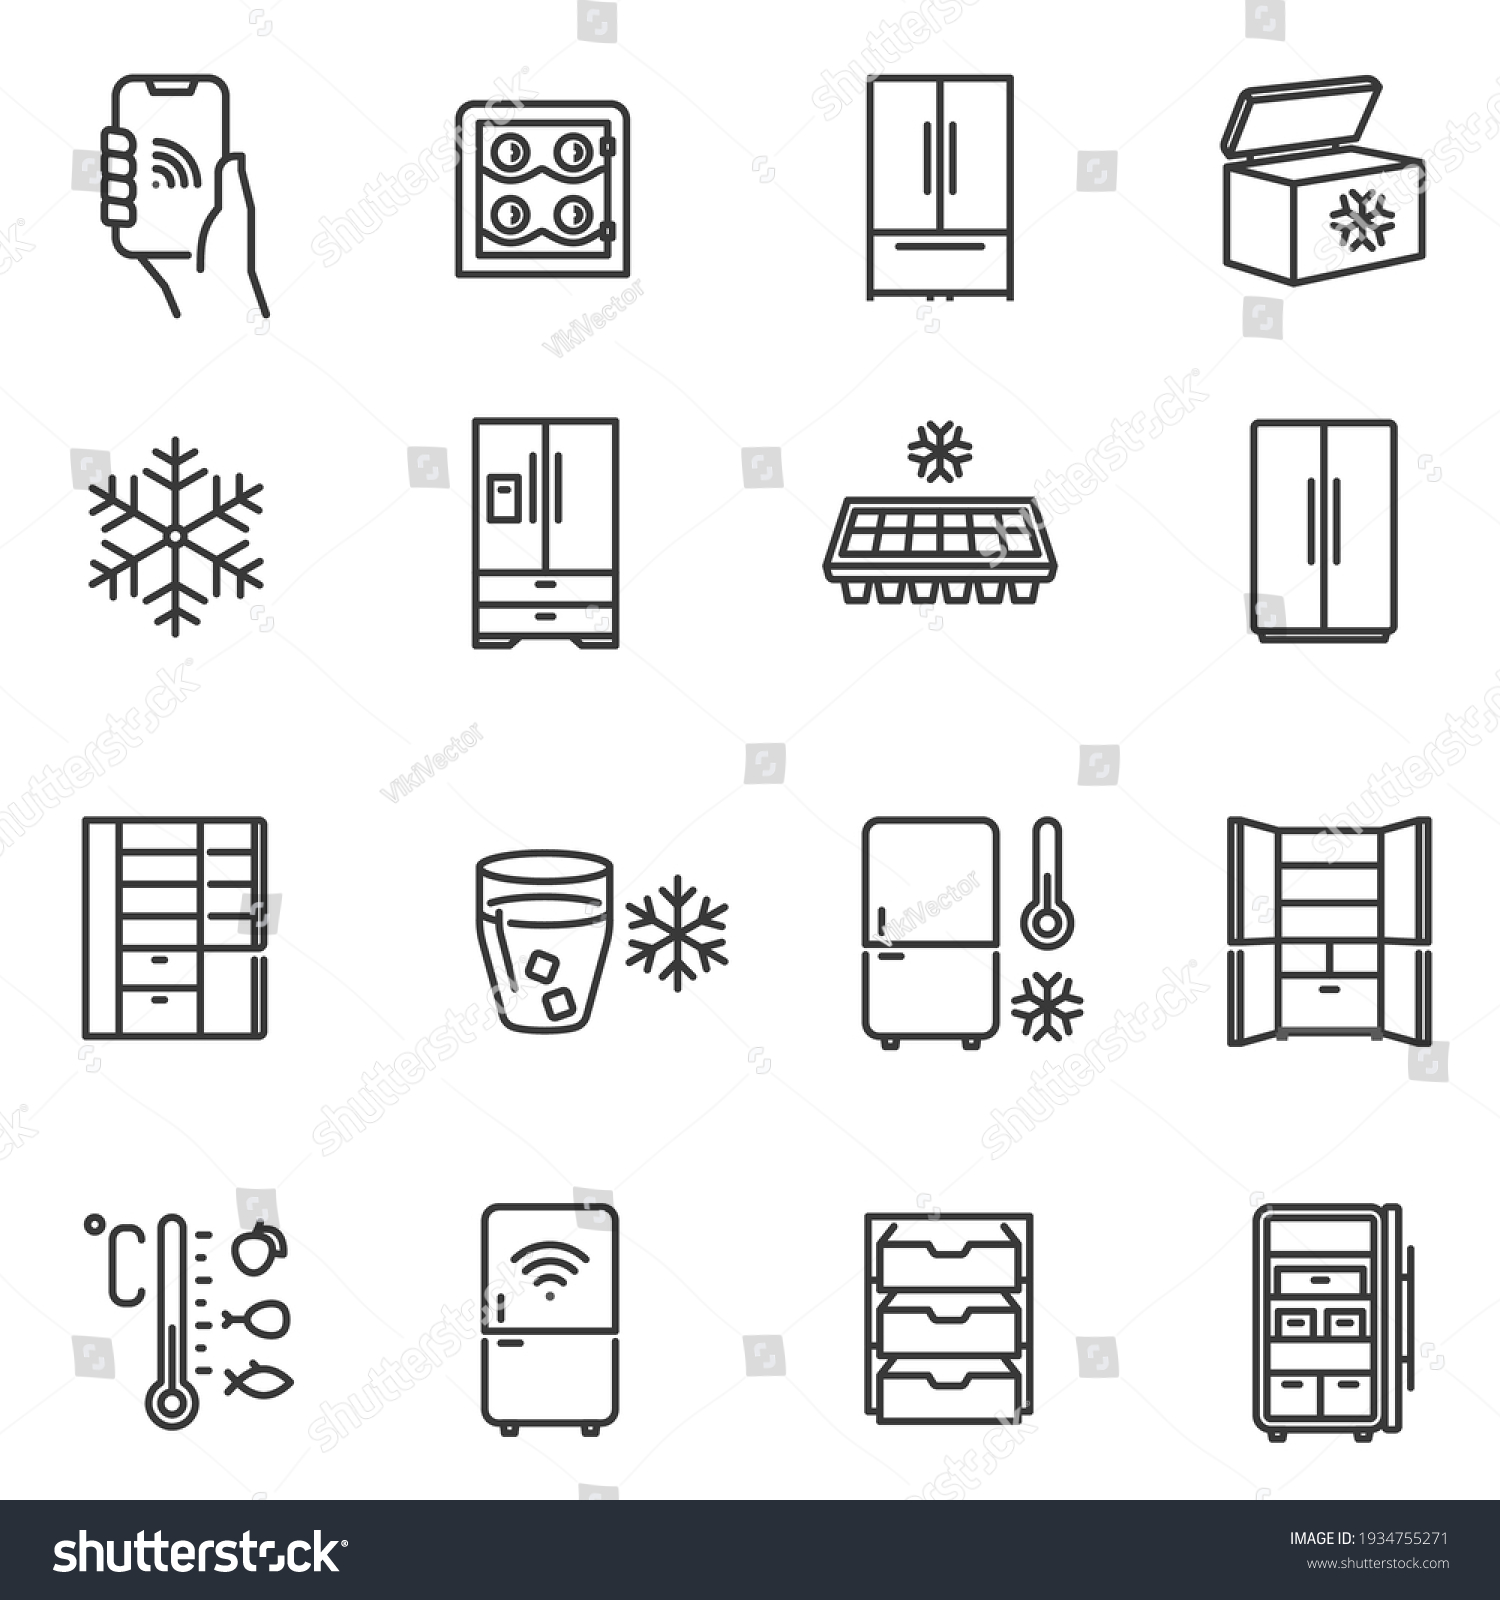 Iceboxes Images, Stock Photos & Vectors | Shutterstock